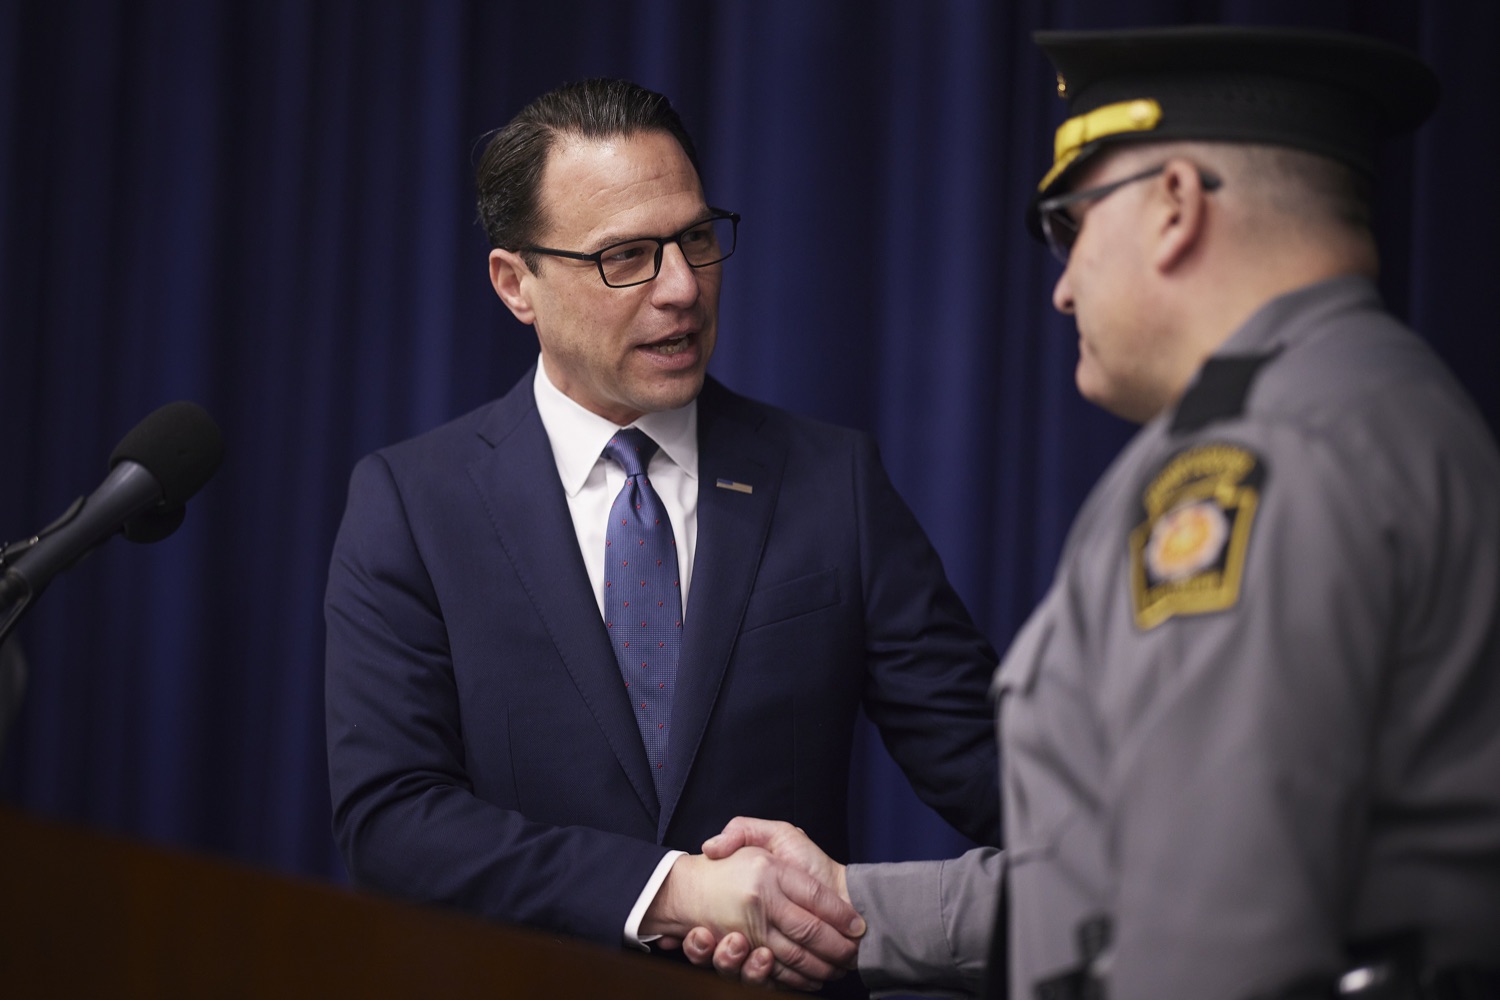 Pennsylvania Governor Josh Shapiro congratulating Pennsylvania State Police Commissioner Christopher Paris shortly after the Pennsylvania Senate confirmed his nomination.  Governor Josh Shapiro visits the Pennsylvania State Police Academy to meet the current classes of Cadets, tour the Academy, and hold a press conference to highlight the crucial investments his budget makes to support law enforcement and invest in public safety.  MARCH 08, 2023 - HERSHEY, PA<br><a href="https://filesource.amperwave.net/commonwealthofpa/photo/22760_gov_publicSafety_dz_0002.JPG" target="_blank">⇣ Download Photo</a>